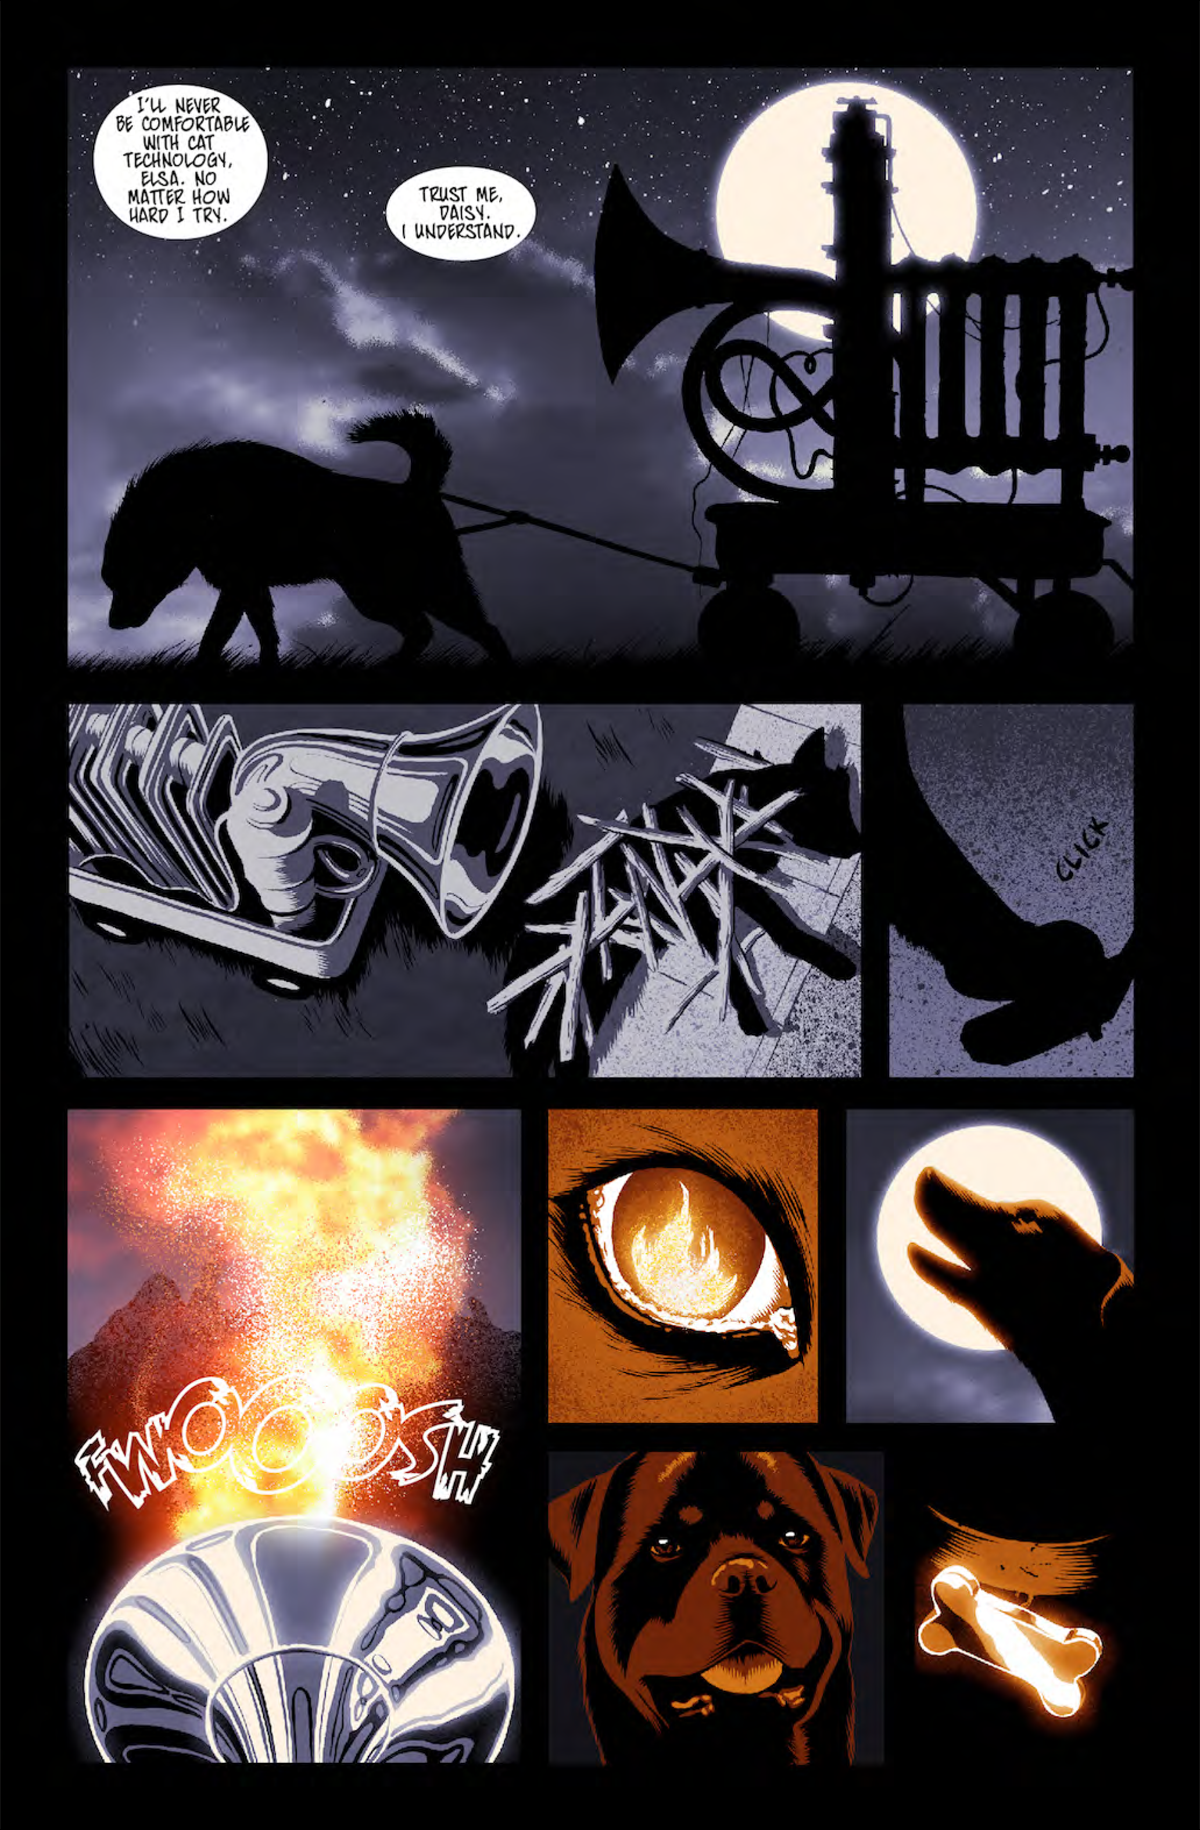 Read The First Issue Of The Fantastic Animal Apocalypse Comic Legend, Here For Free